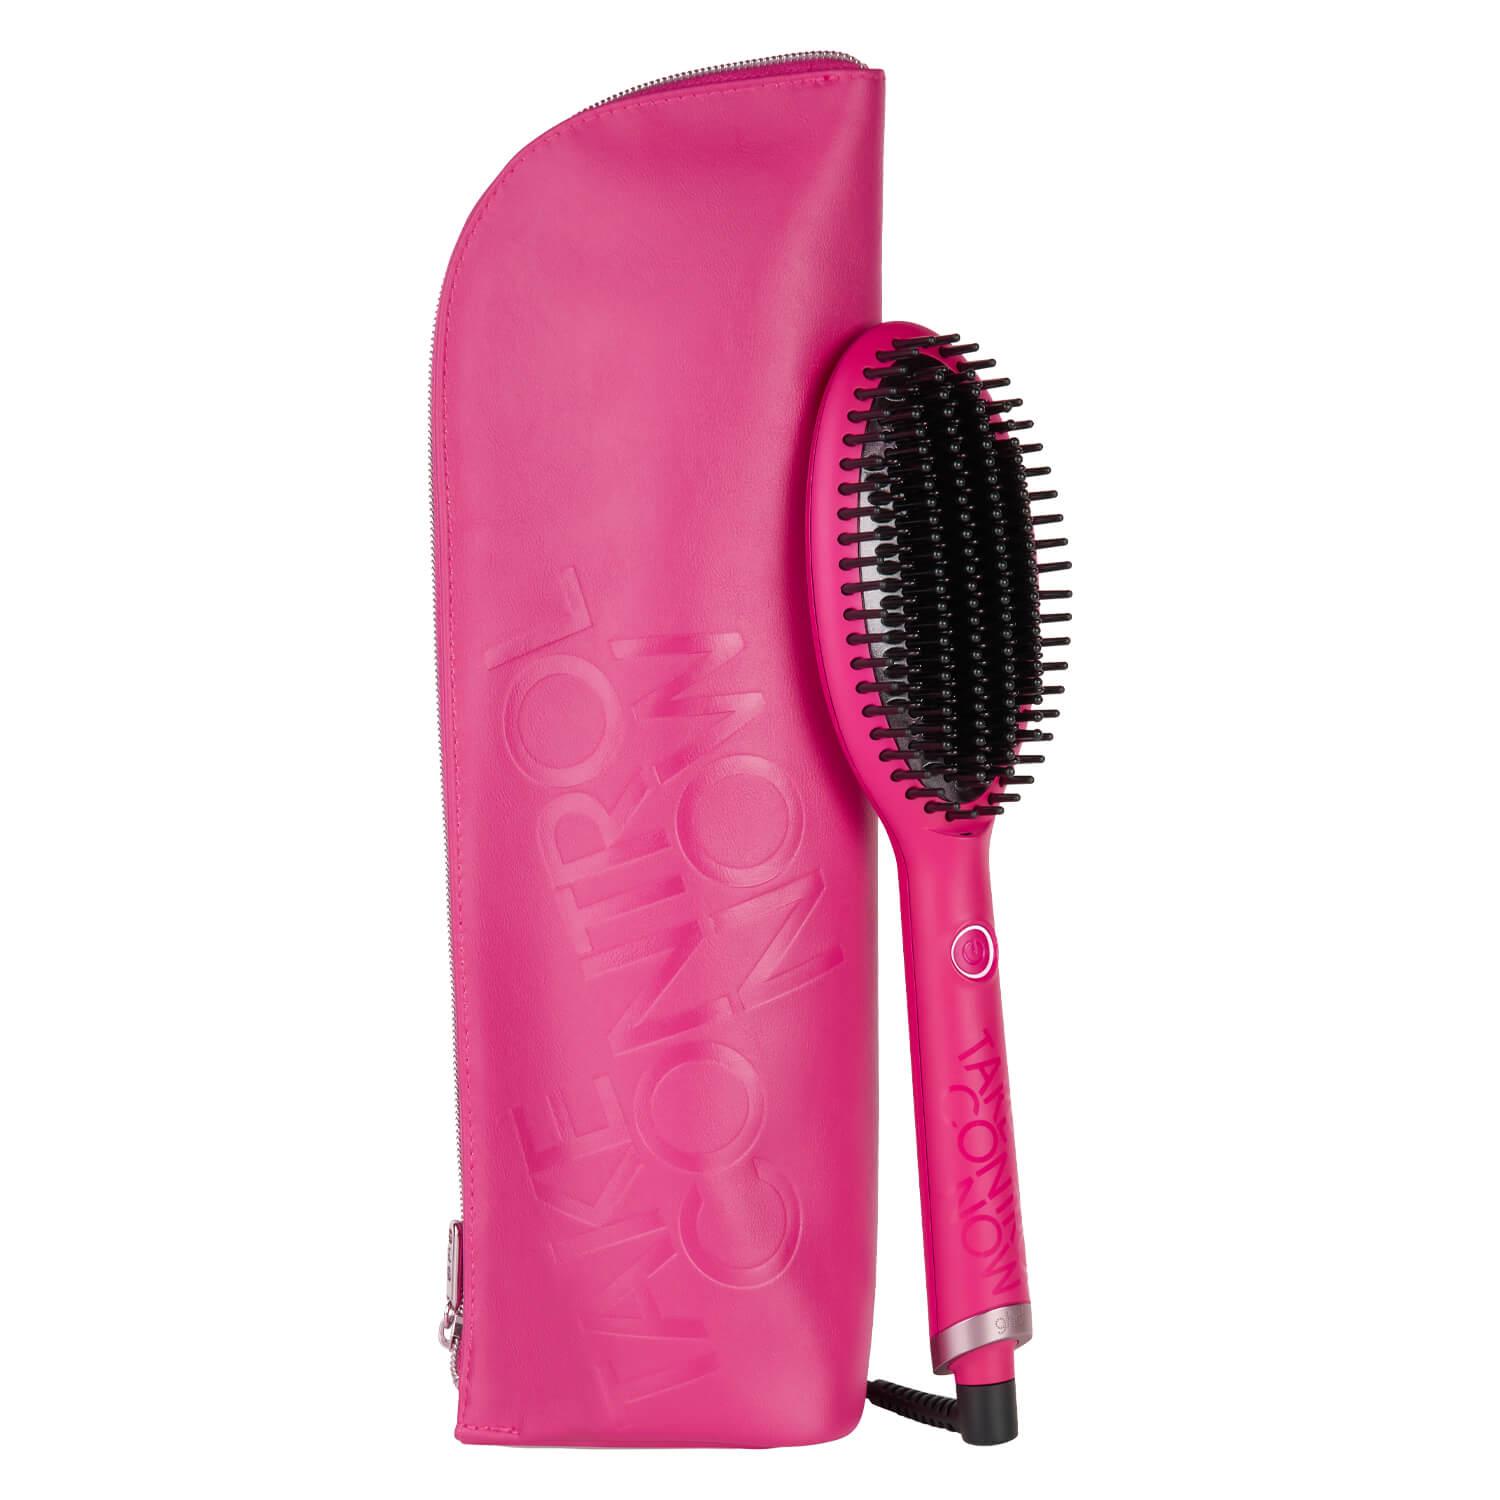 Take Control Now Glide Hot Brush Pink